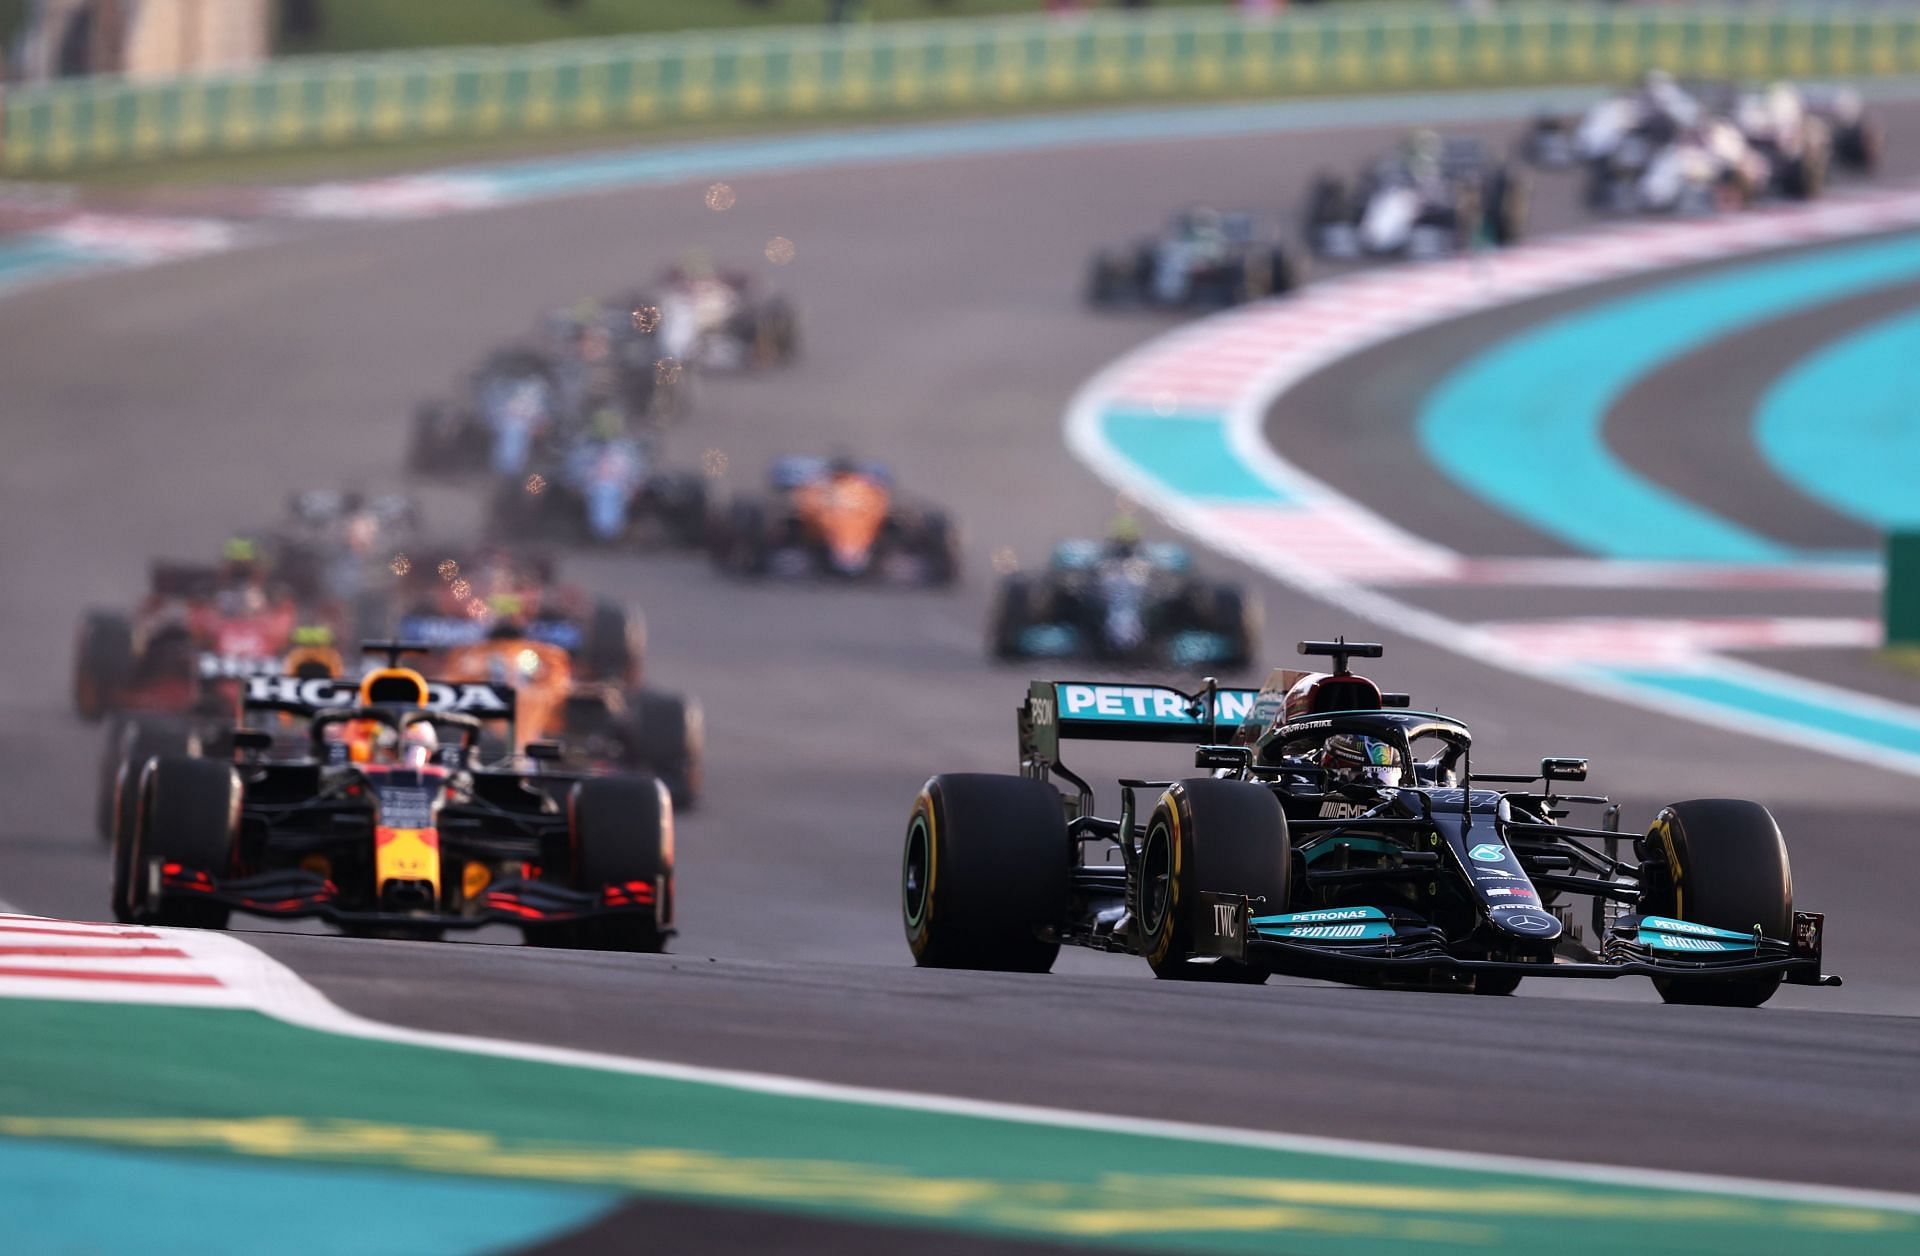 Lewis Hamilton leads Max Verstappen at the start of the F1 Grand Prix of Abu Dhabi (Photo by Lars Baron/Getty Images)